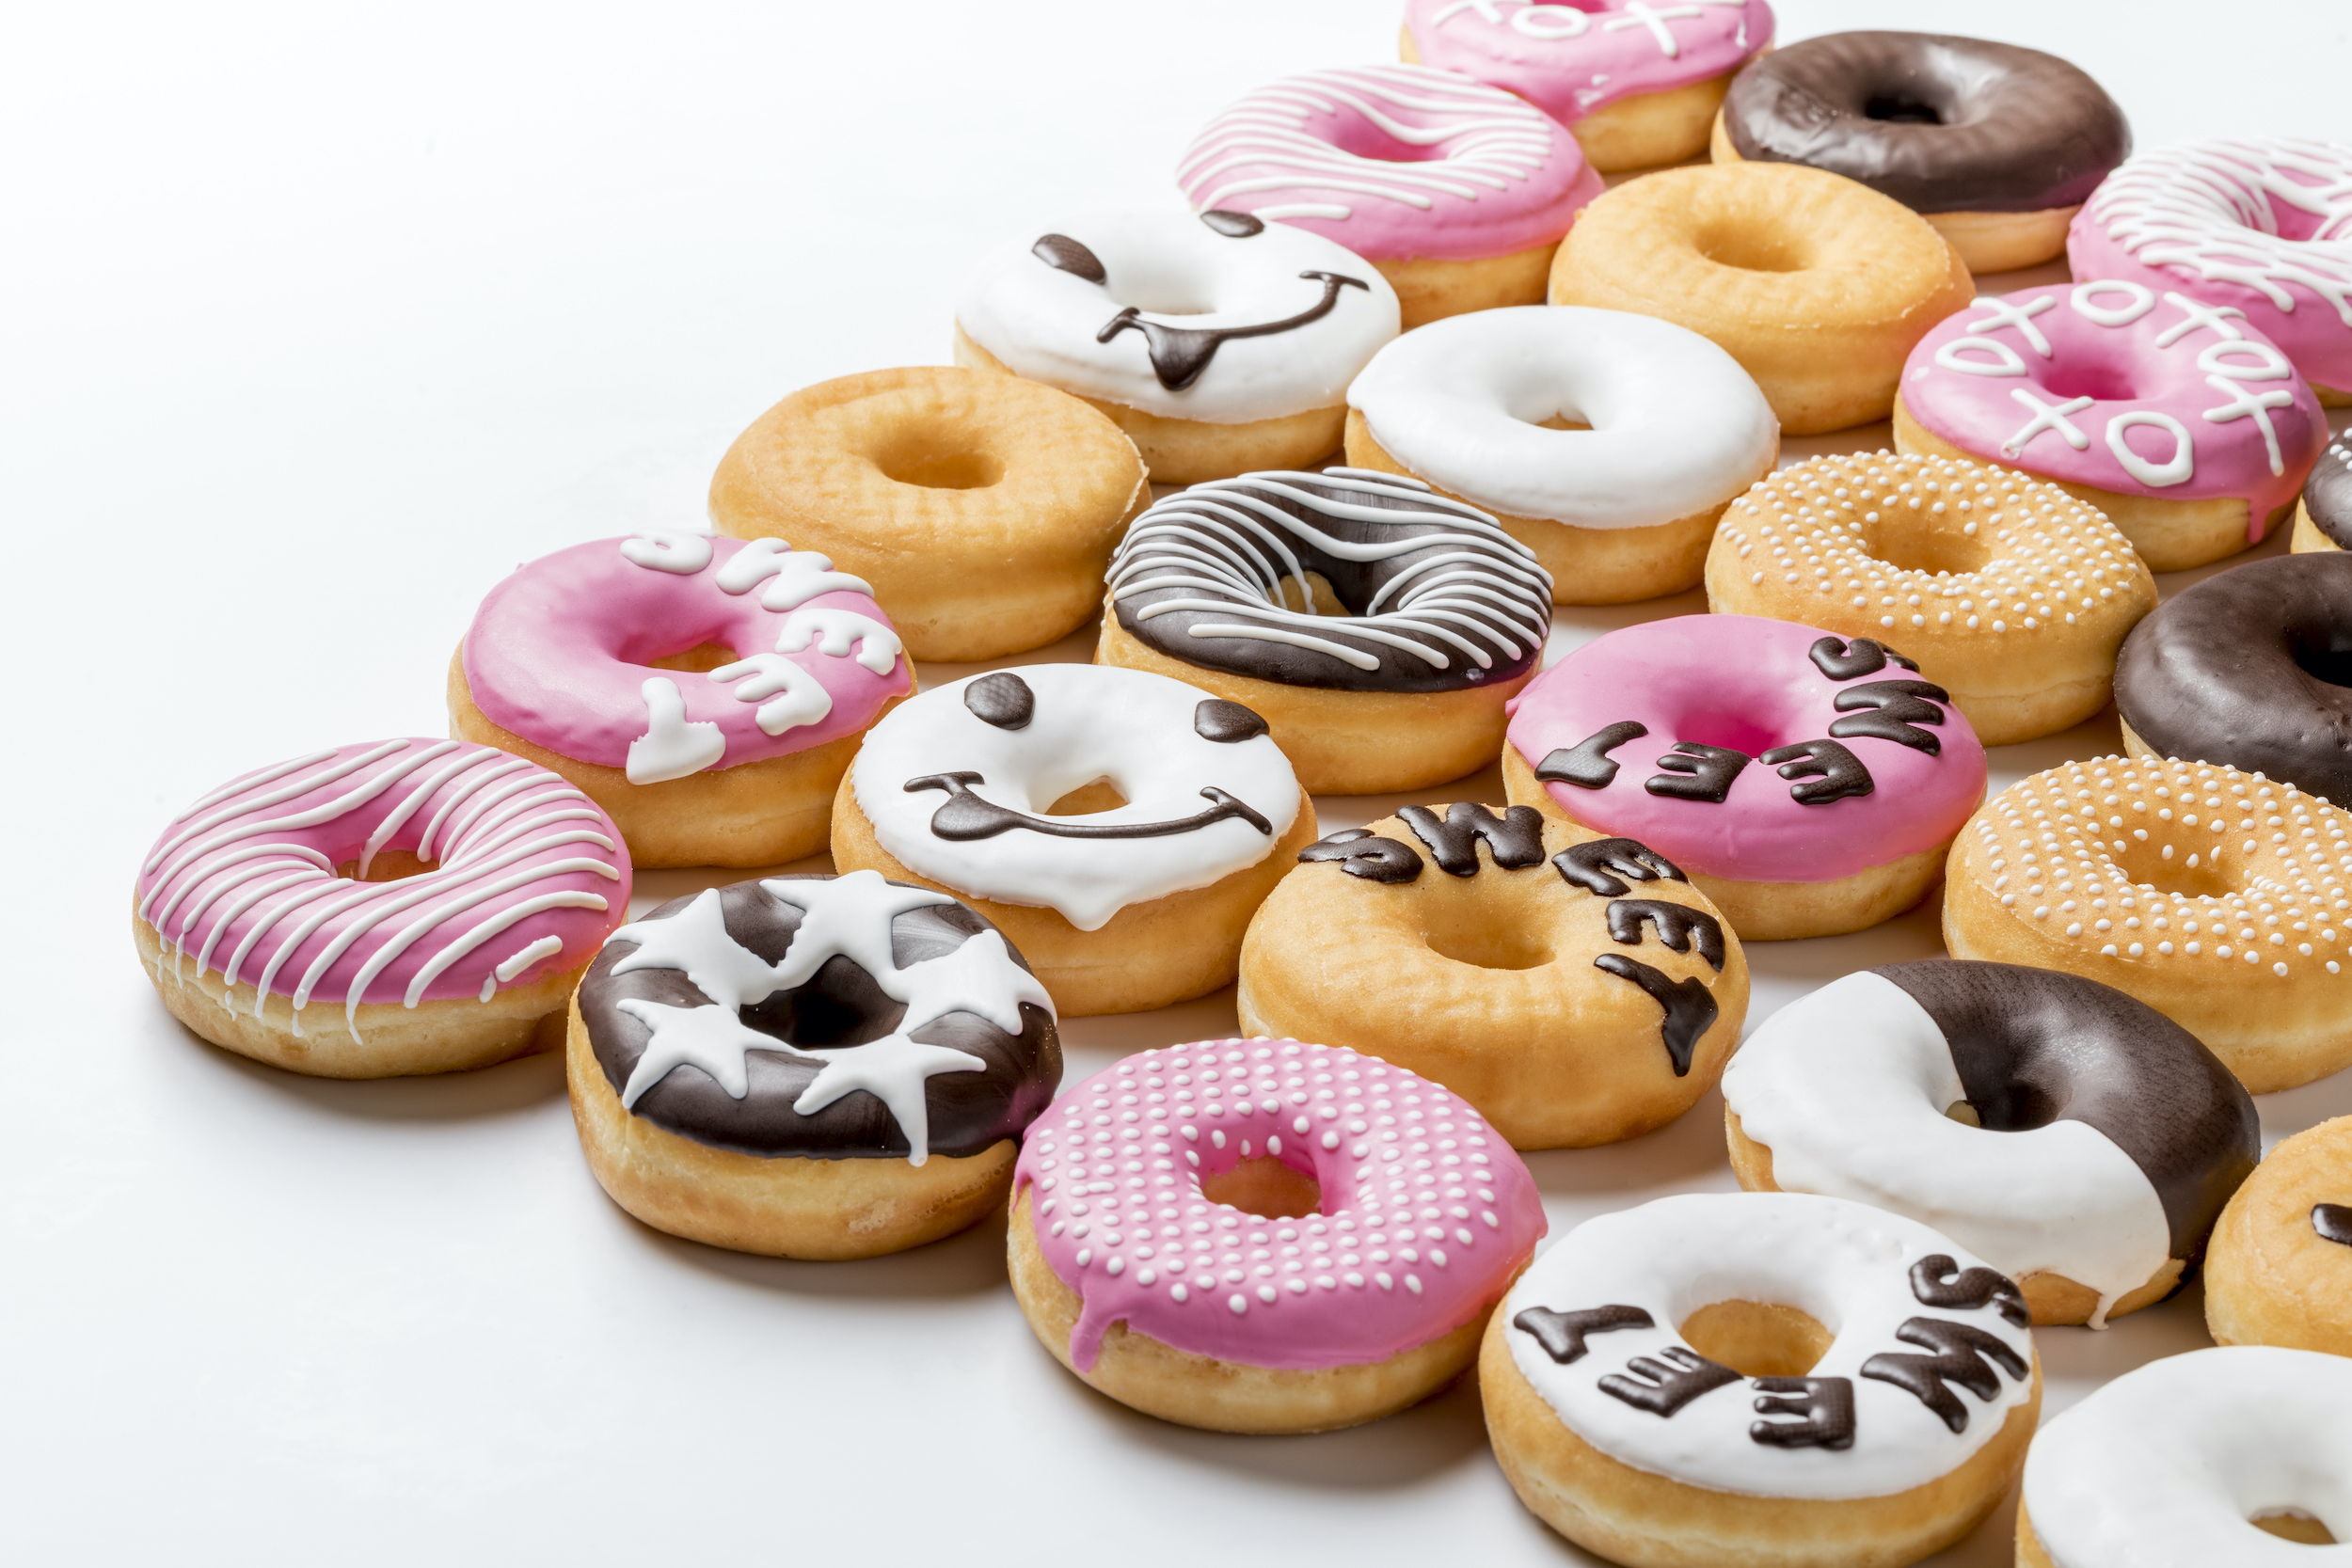 Donuts graphically decorated with fat compound